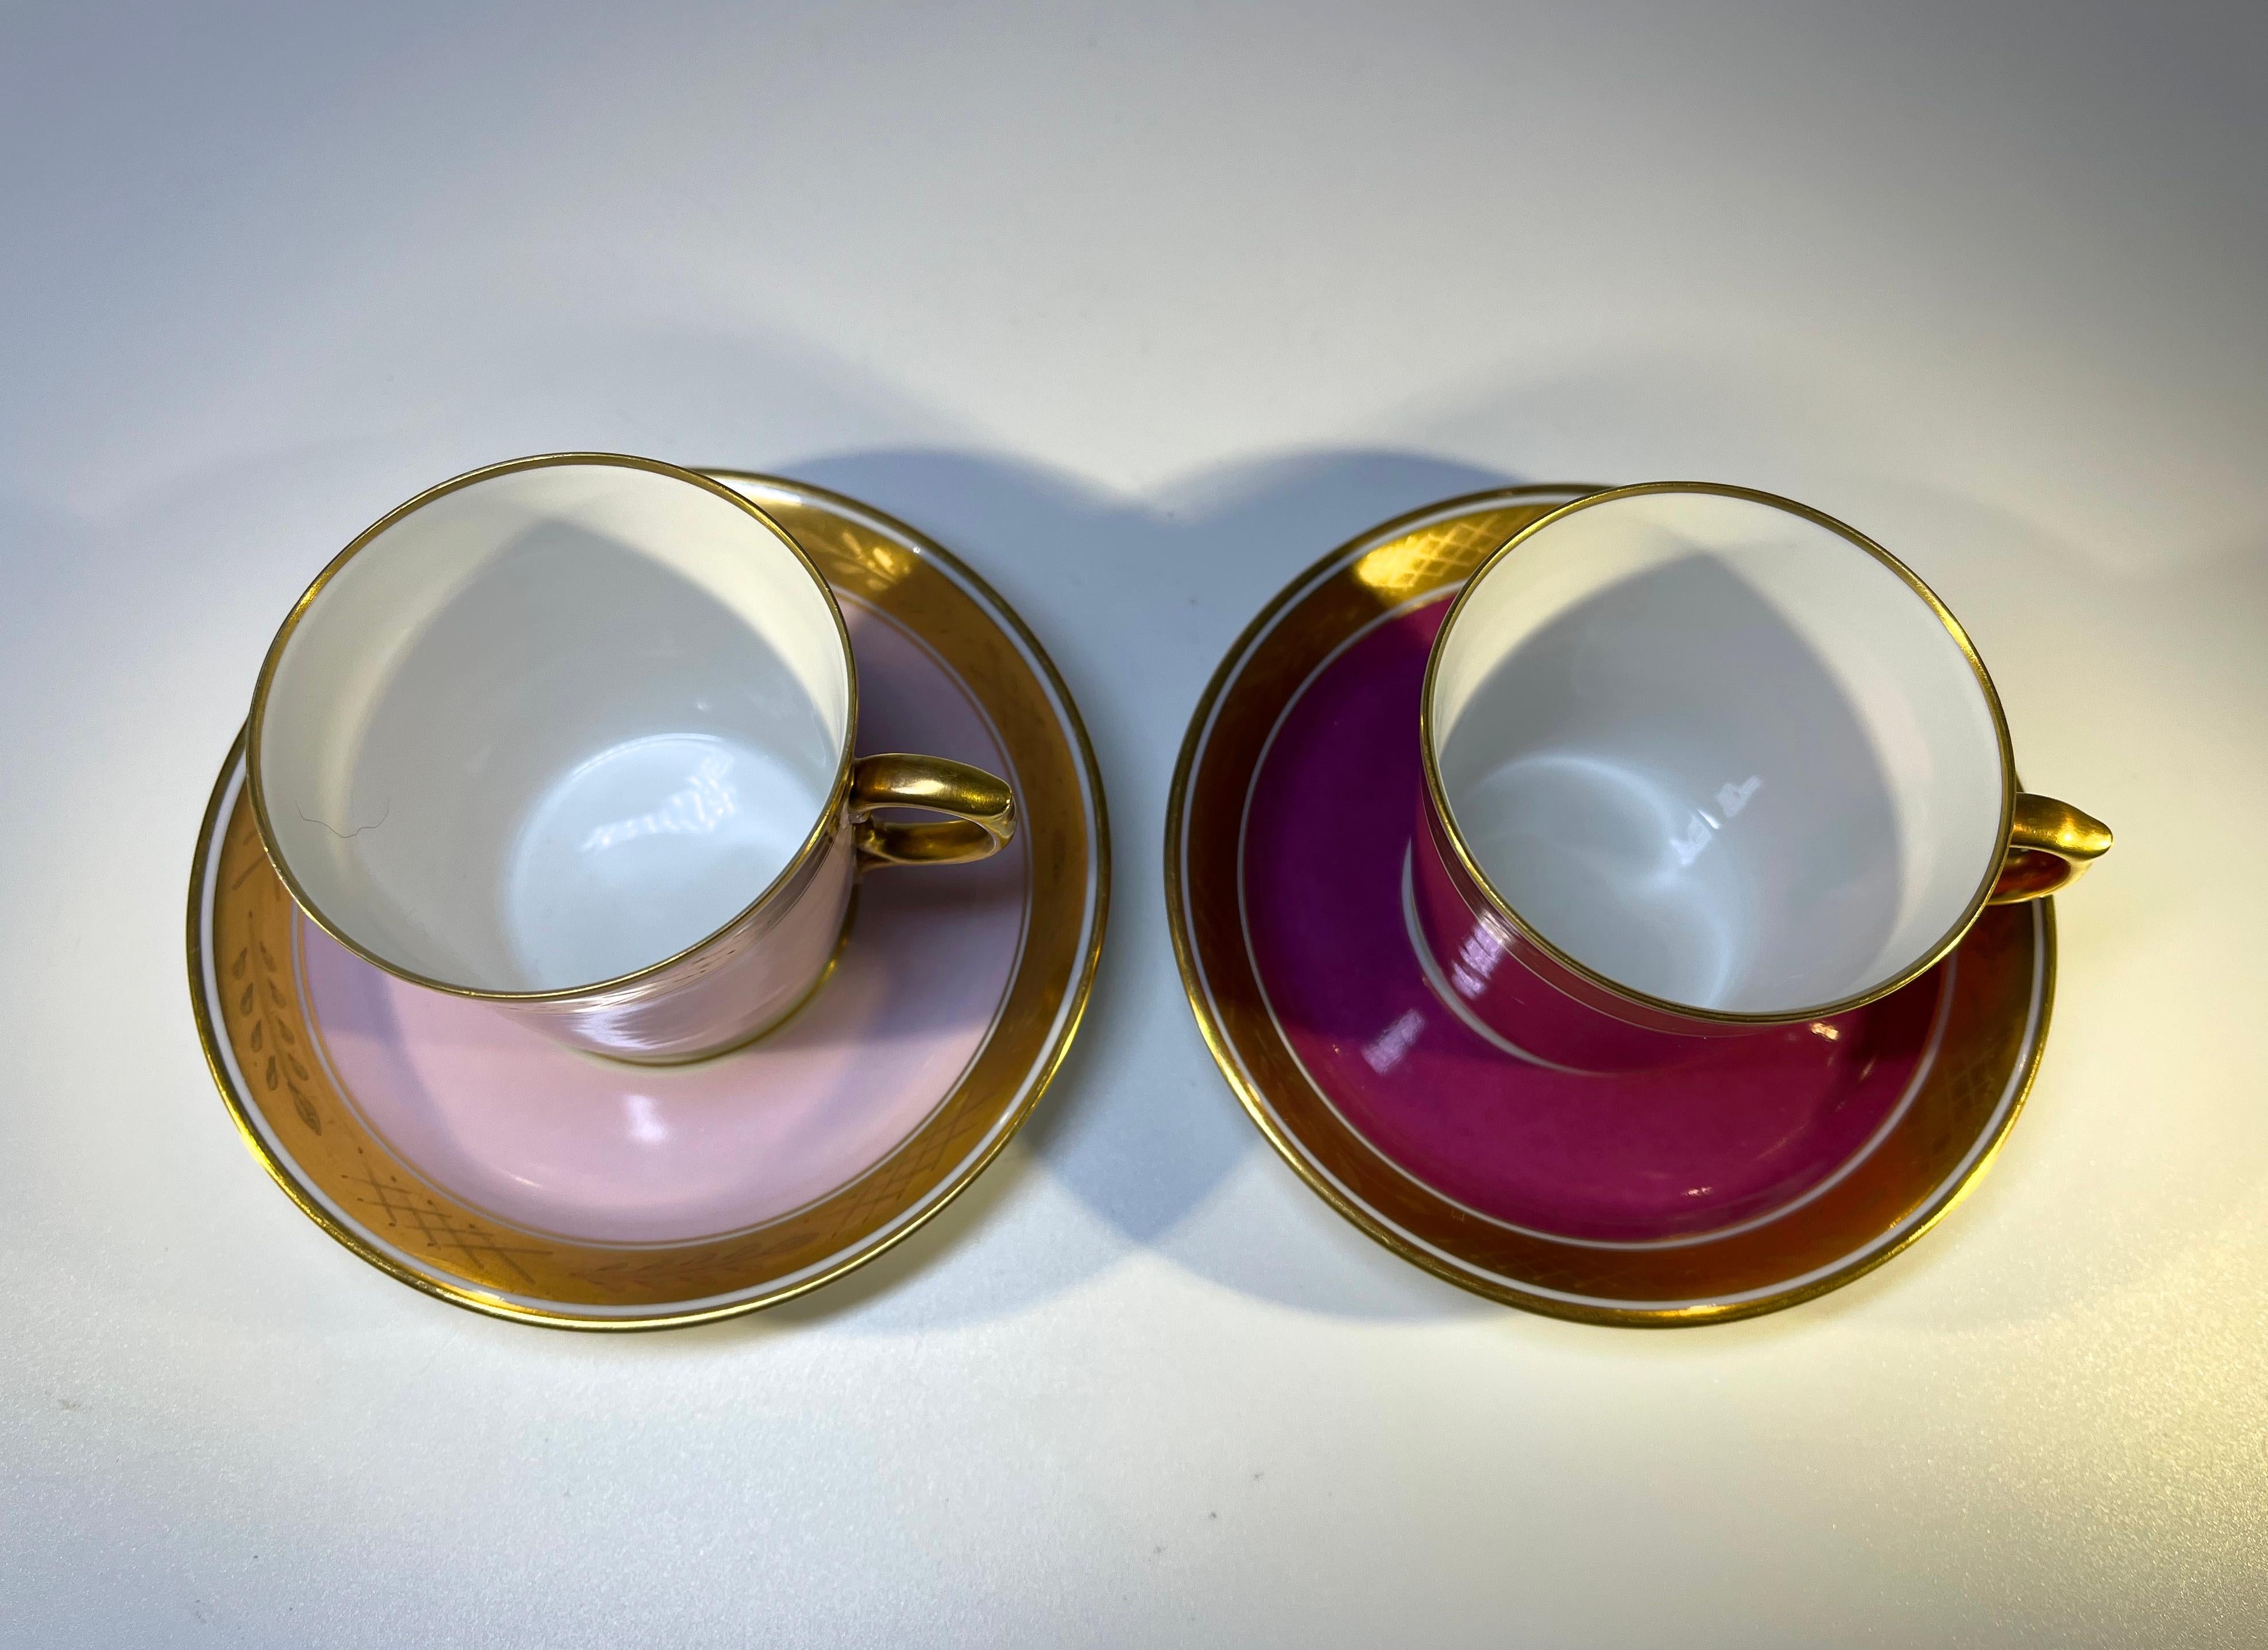 Pair of Royal Copenhagen Bone China Demitasse Cups and Saucers circa 1951 In Good Condition For Sale In Rothley, Leicestershire